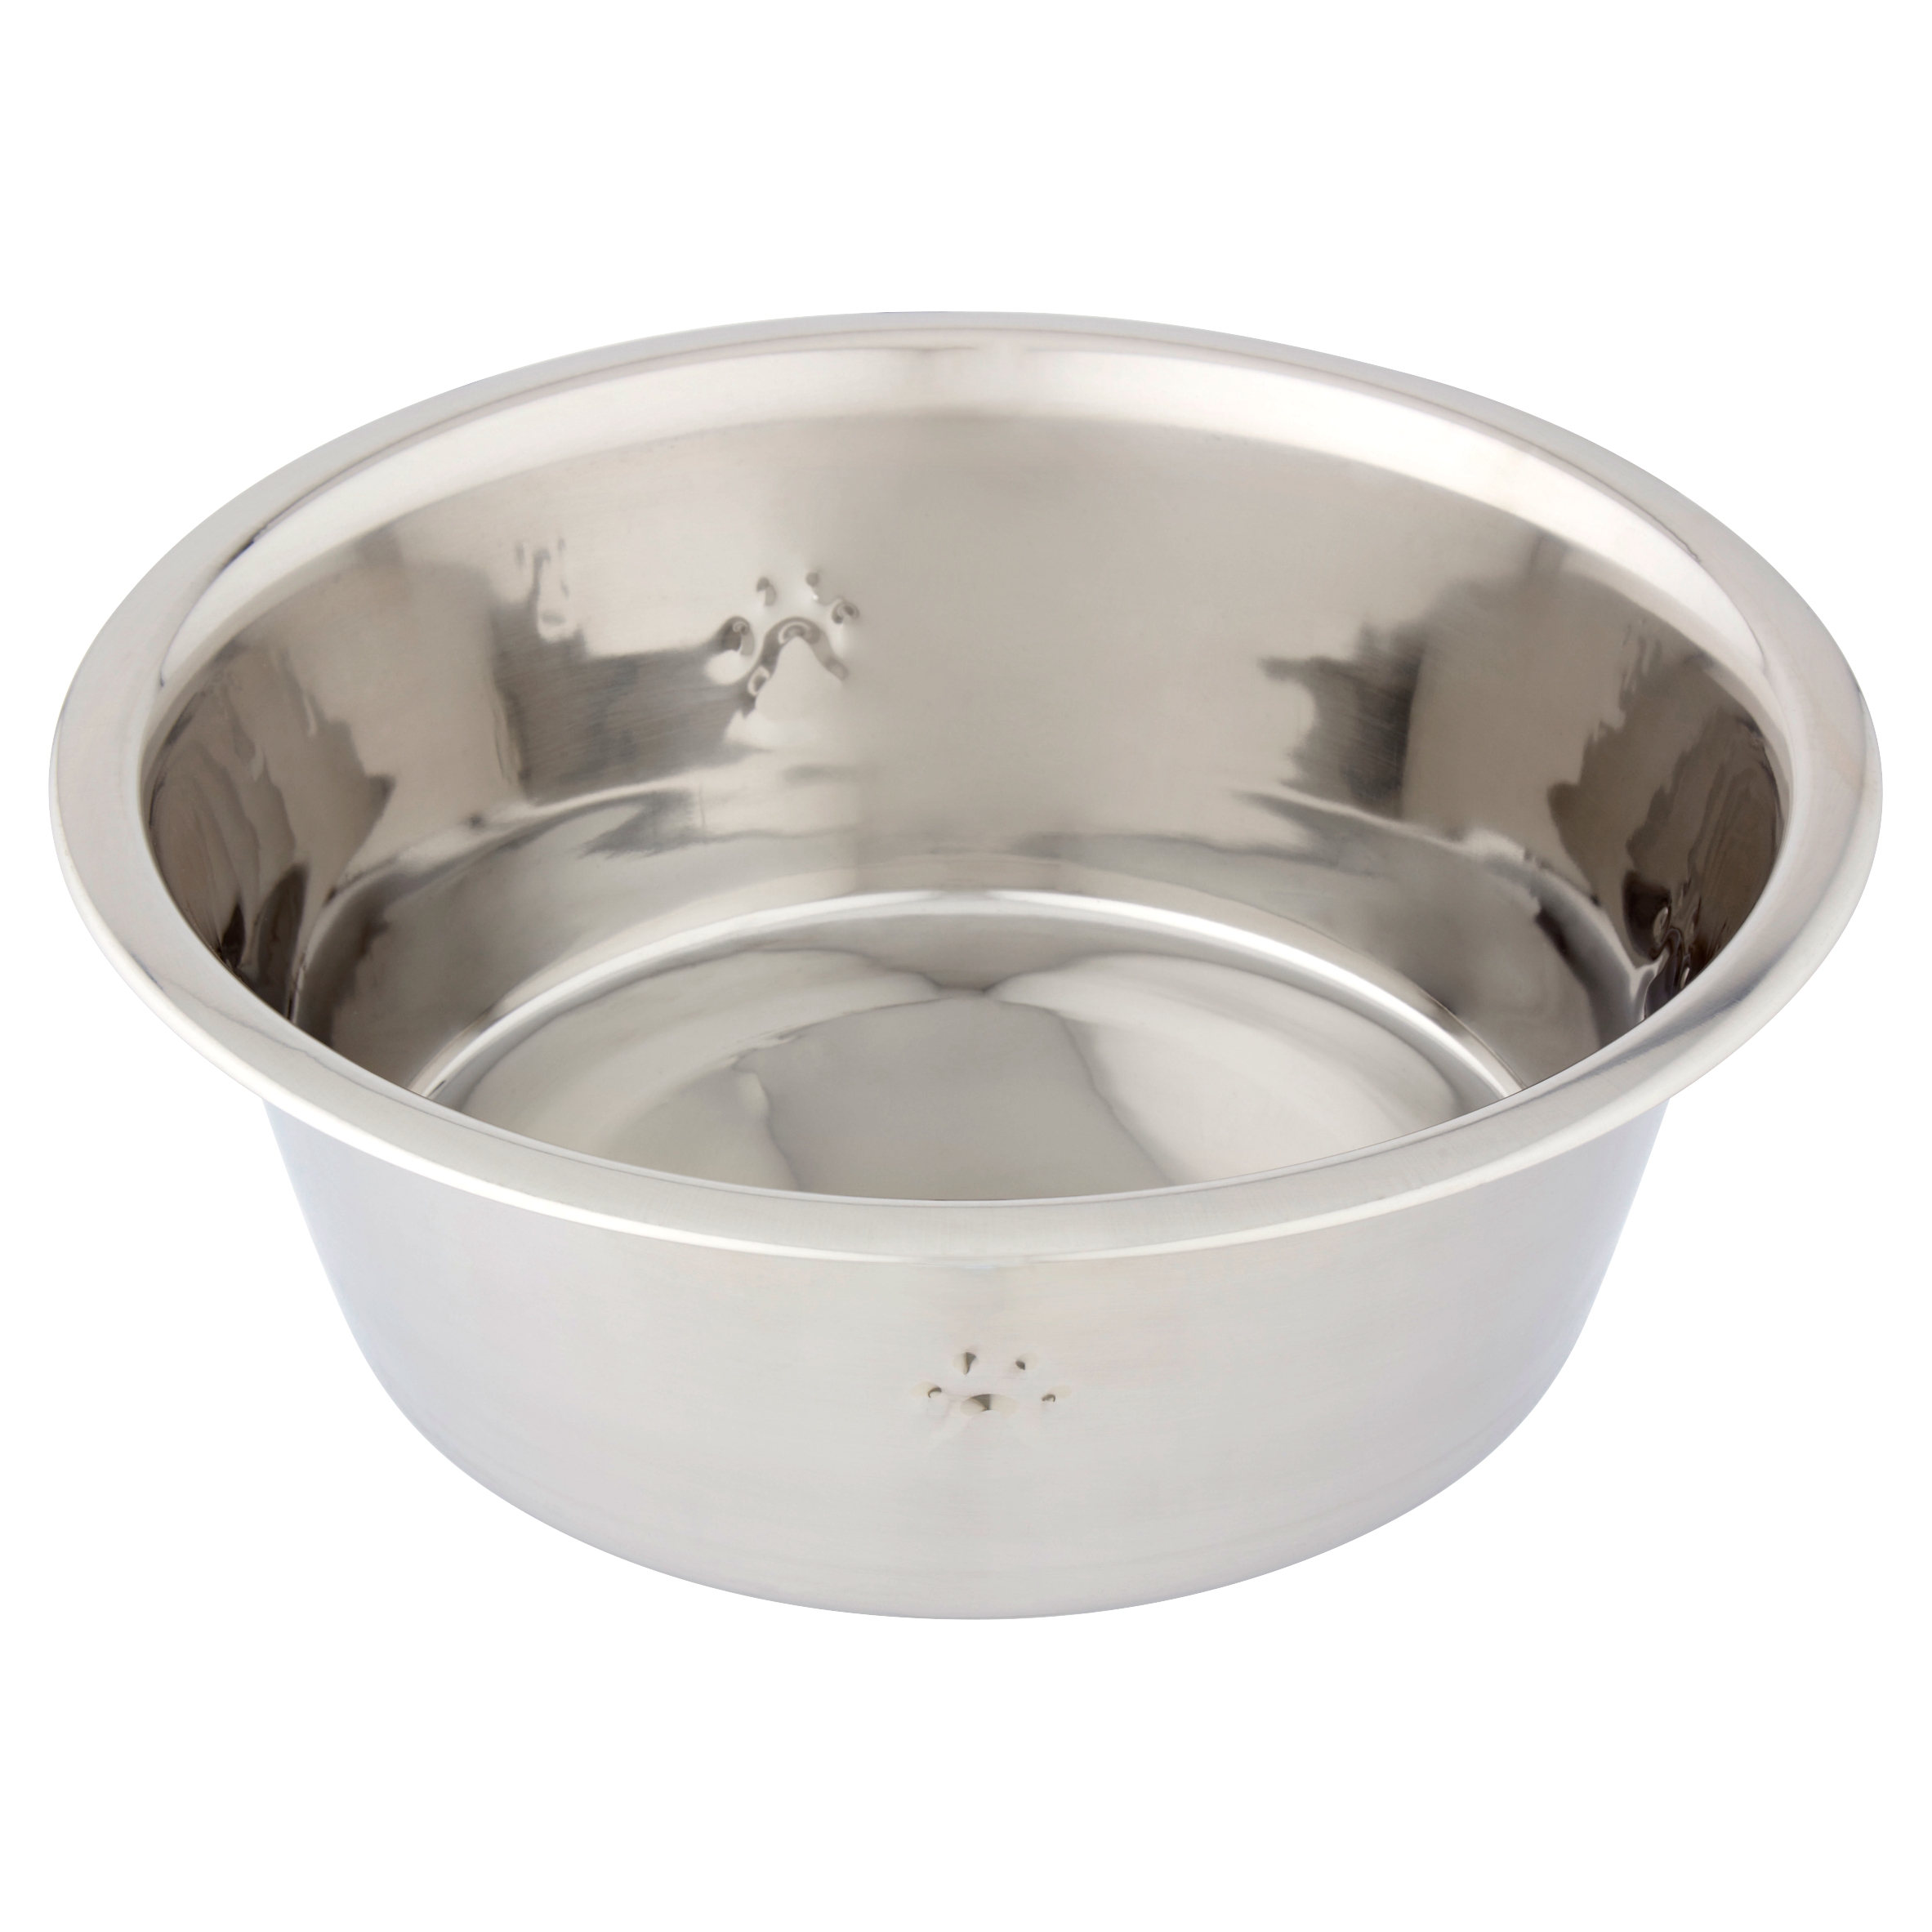 Vibrant Life Stainless Steel Dog Bowl, Large - image 1 of 5